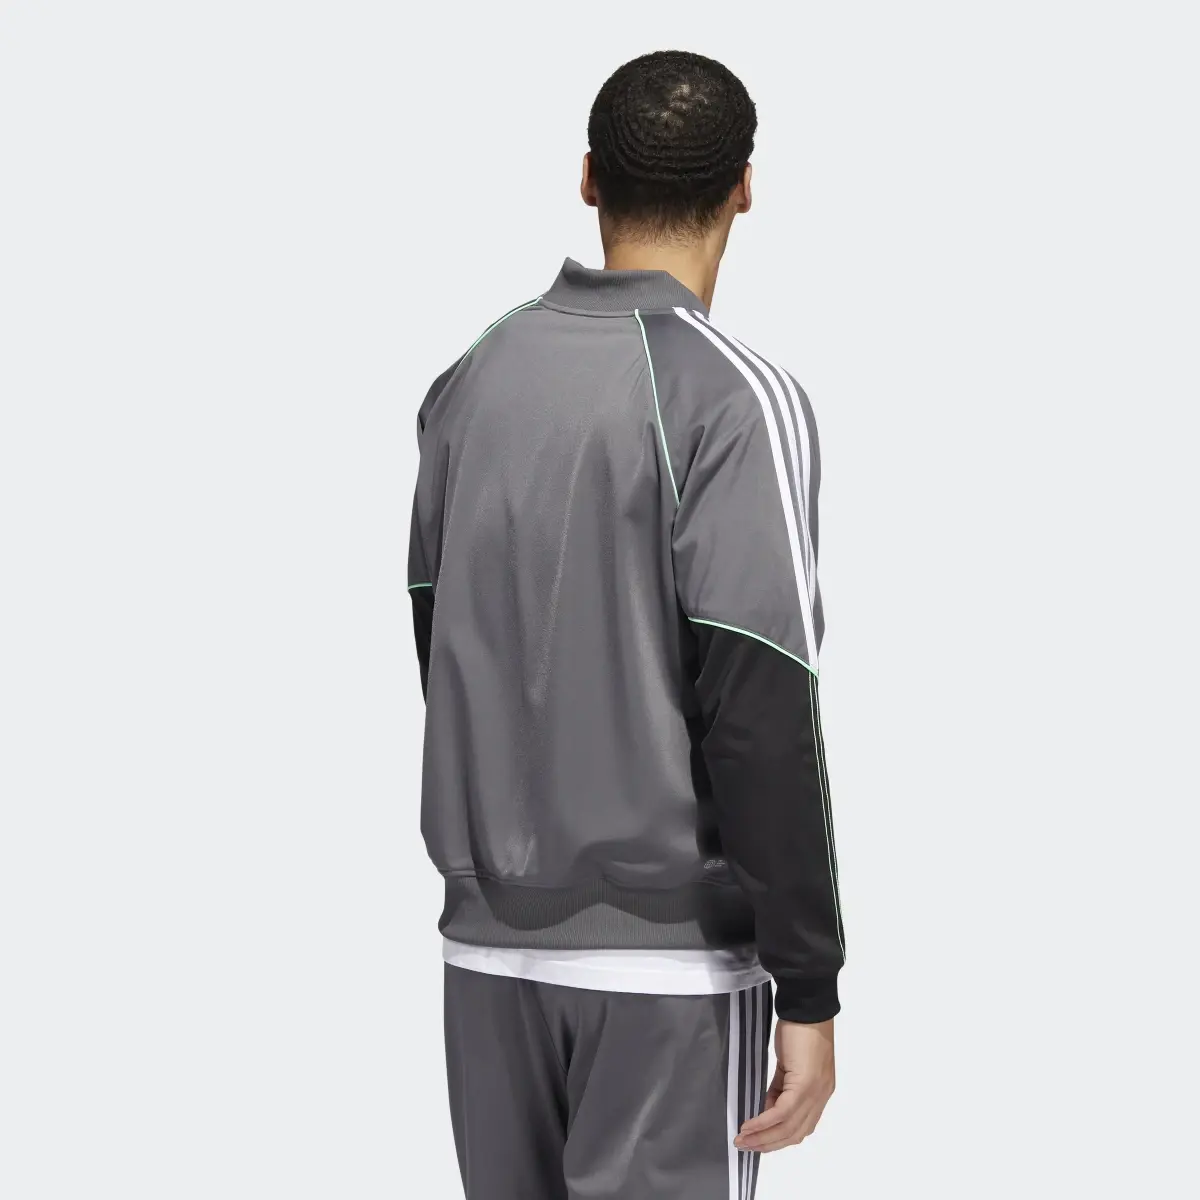 Adidas Tricot SST Track Top. 3